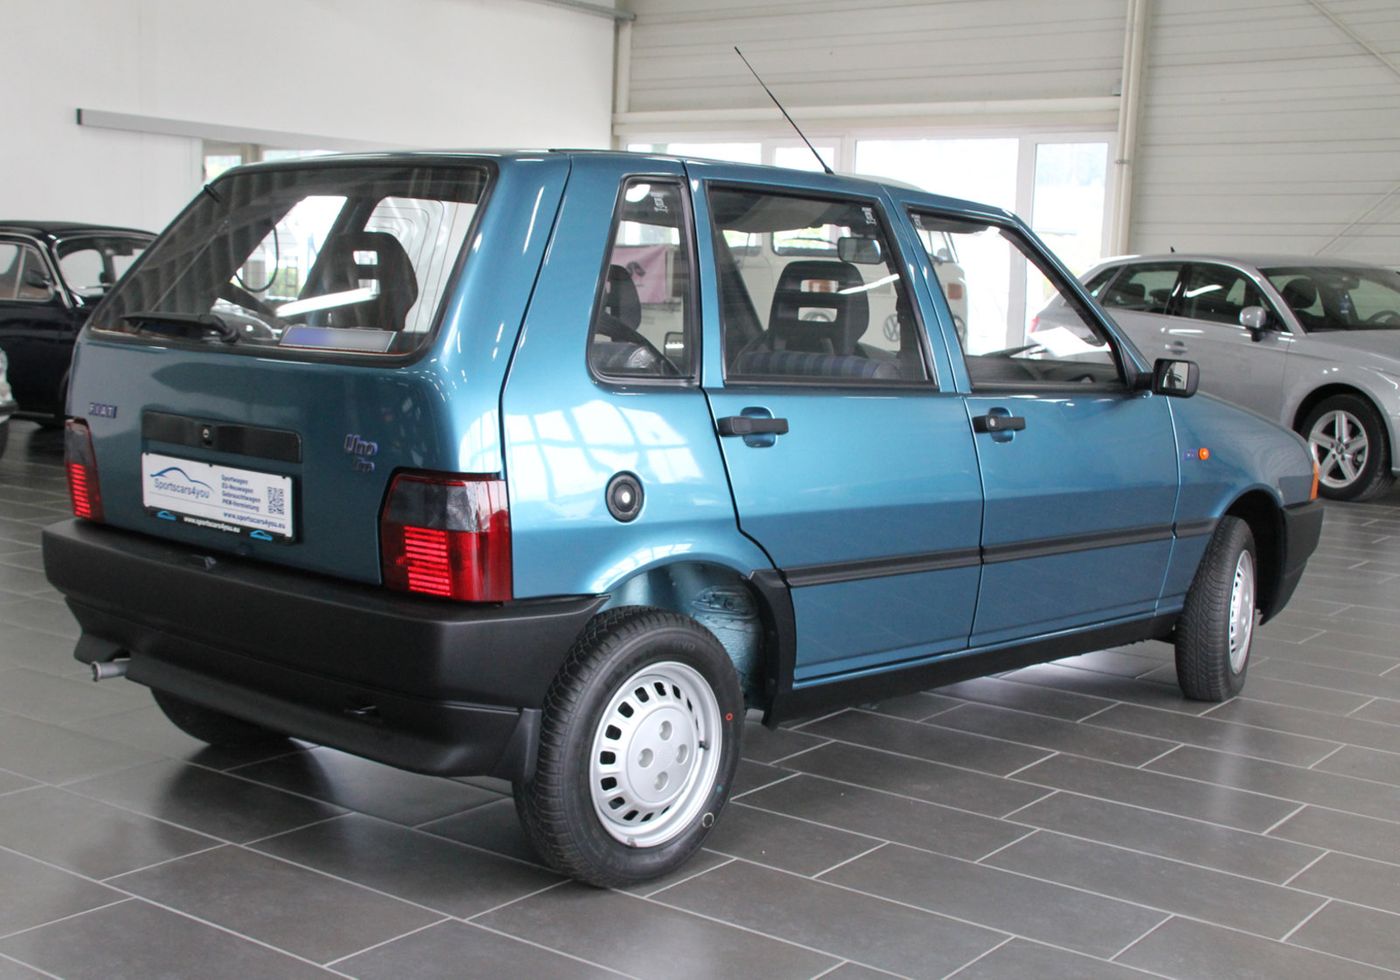 1996 Fiat Uno Travels Through Time, Reaches 2020 With Just 560